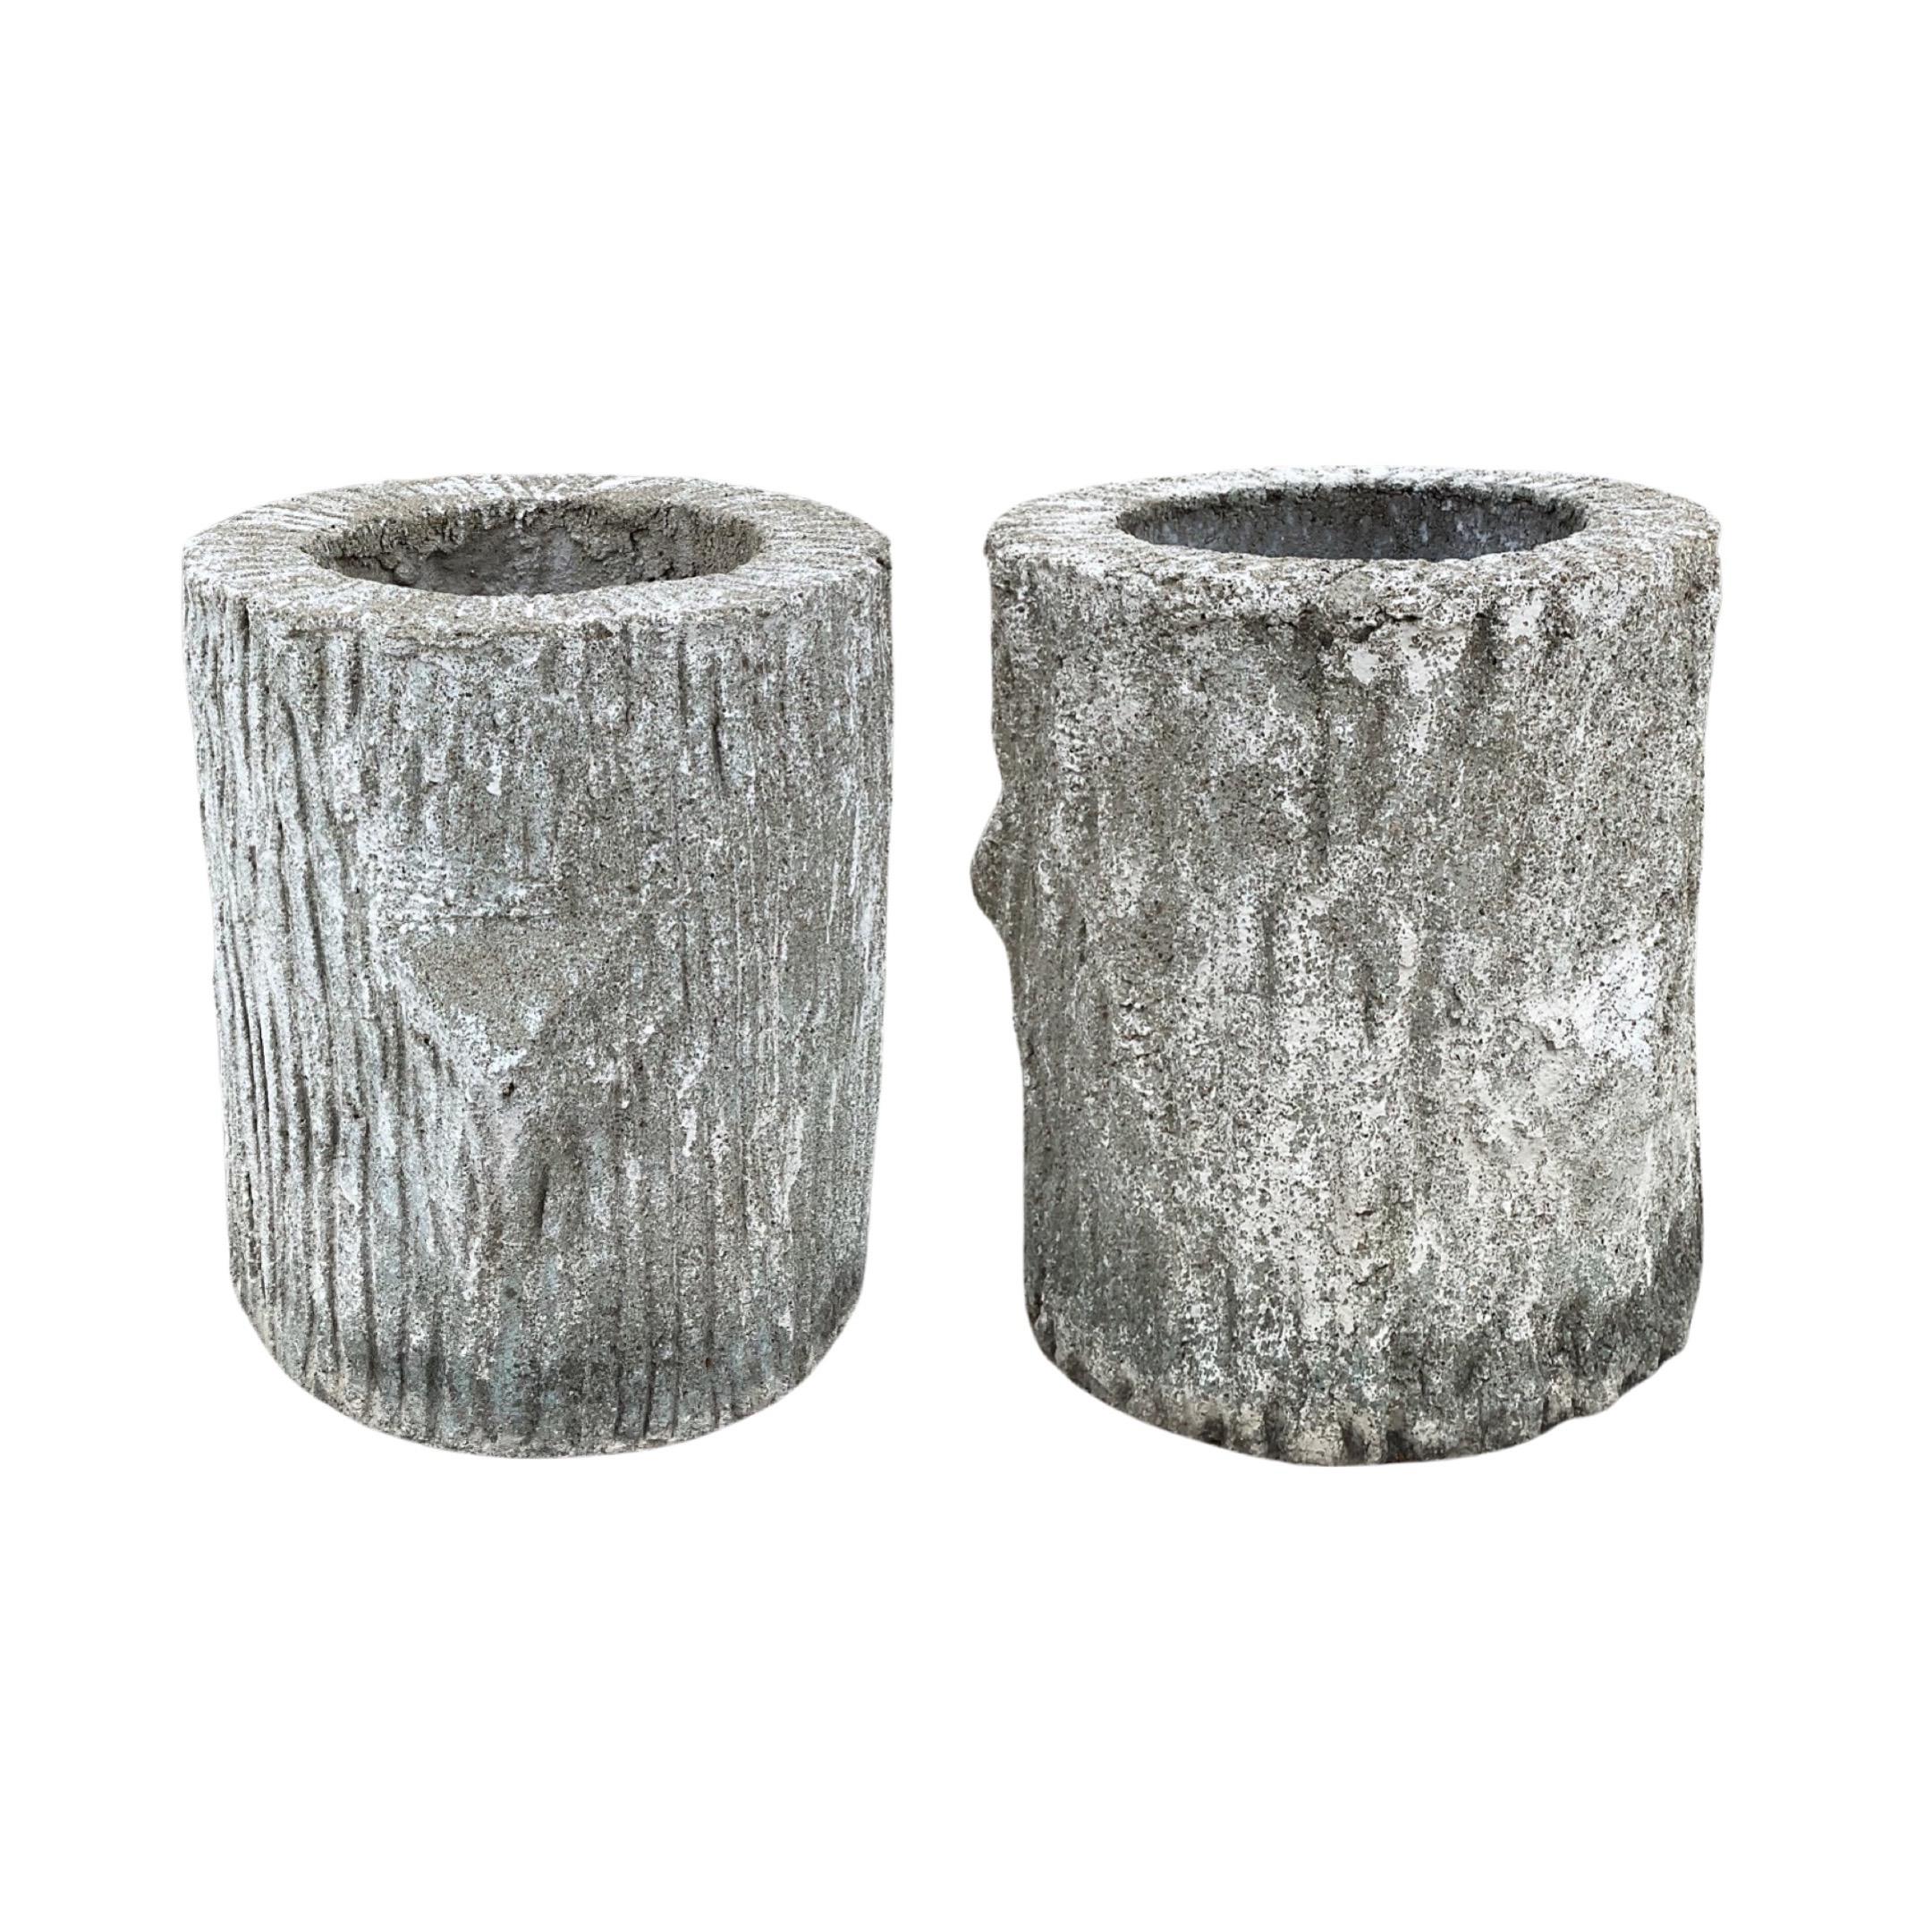 This pair of French faux bois composite planters is a unique and beautiful way to add greenery to your outdoor living space. Each planter is made of a fiberglass and stone composite, durable and lightweight, and sold as a pair. Add color and life to